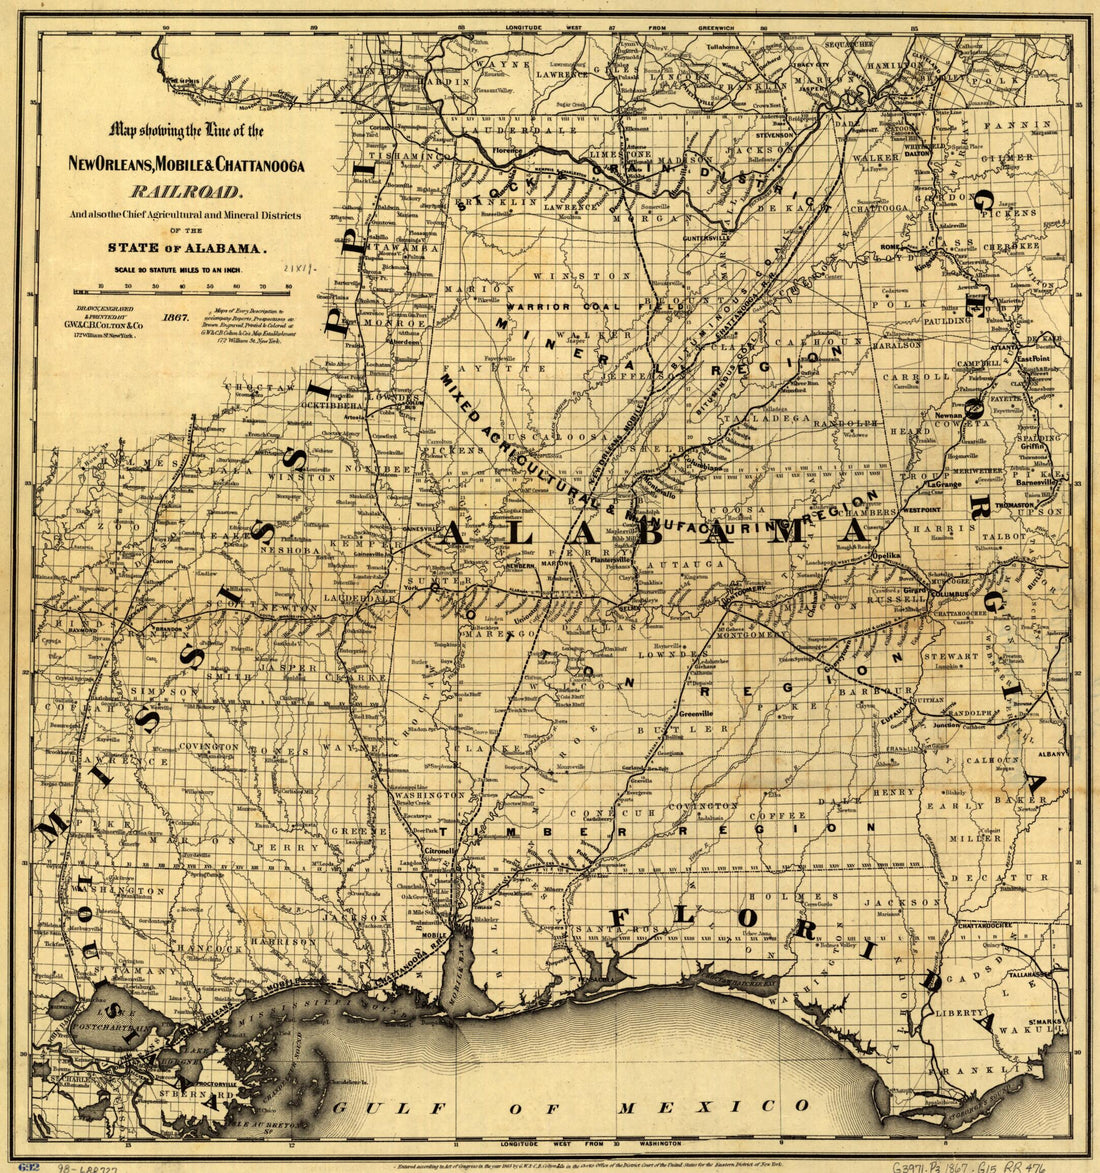 This old map of Map Showing the Line of the New Orleans, Mobile &amp; Chattanooga Railroad, and Also the Chief Agricultural and Mineral Districts of the State of Alabama from 1867 was created by  G.W. &amp; C.B. Colton &amp; Co, Mobile New Orleans in 1867